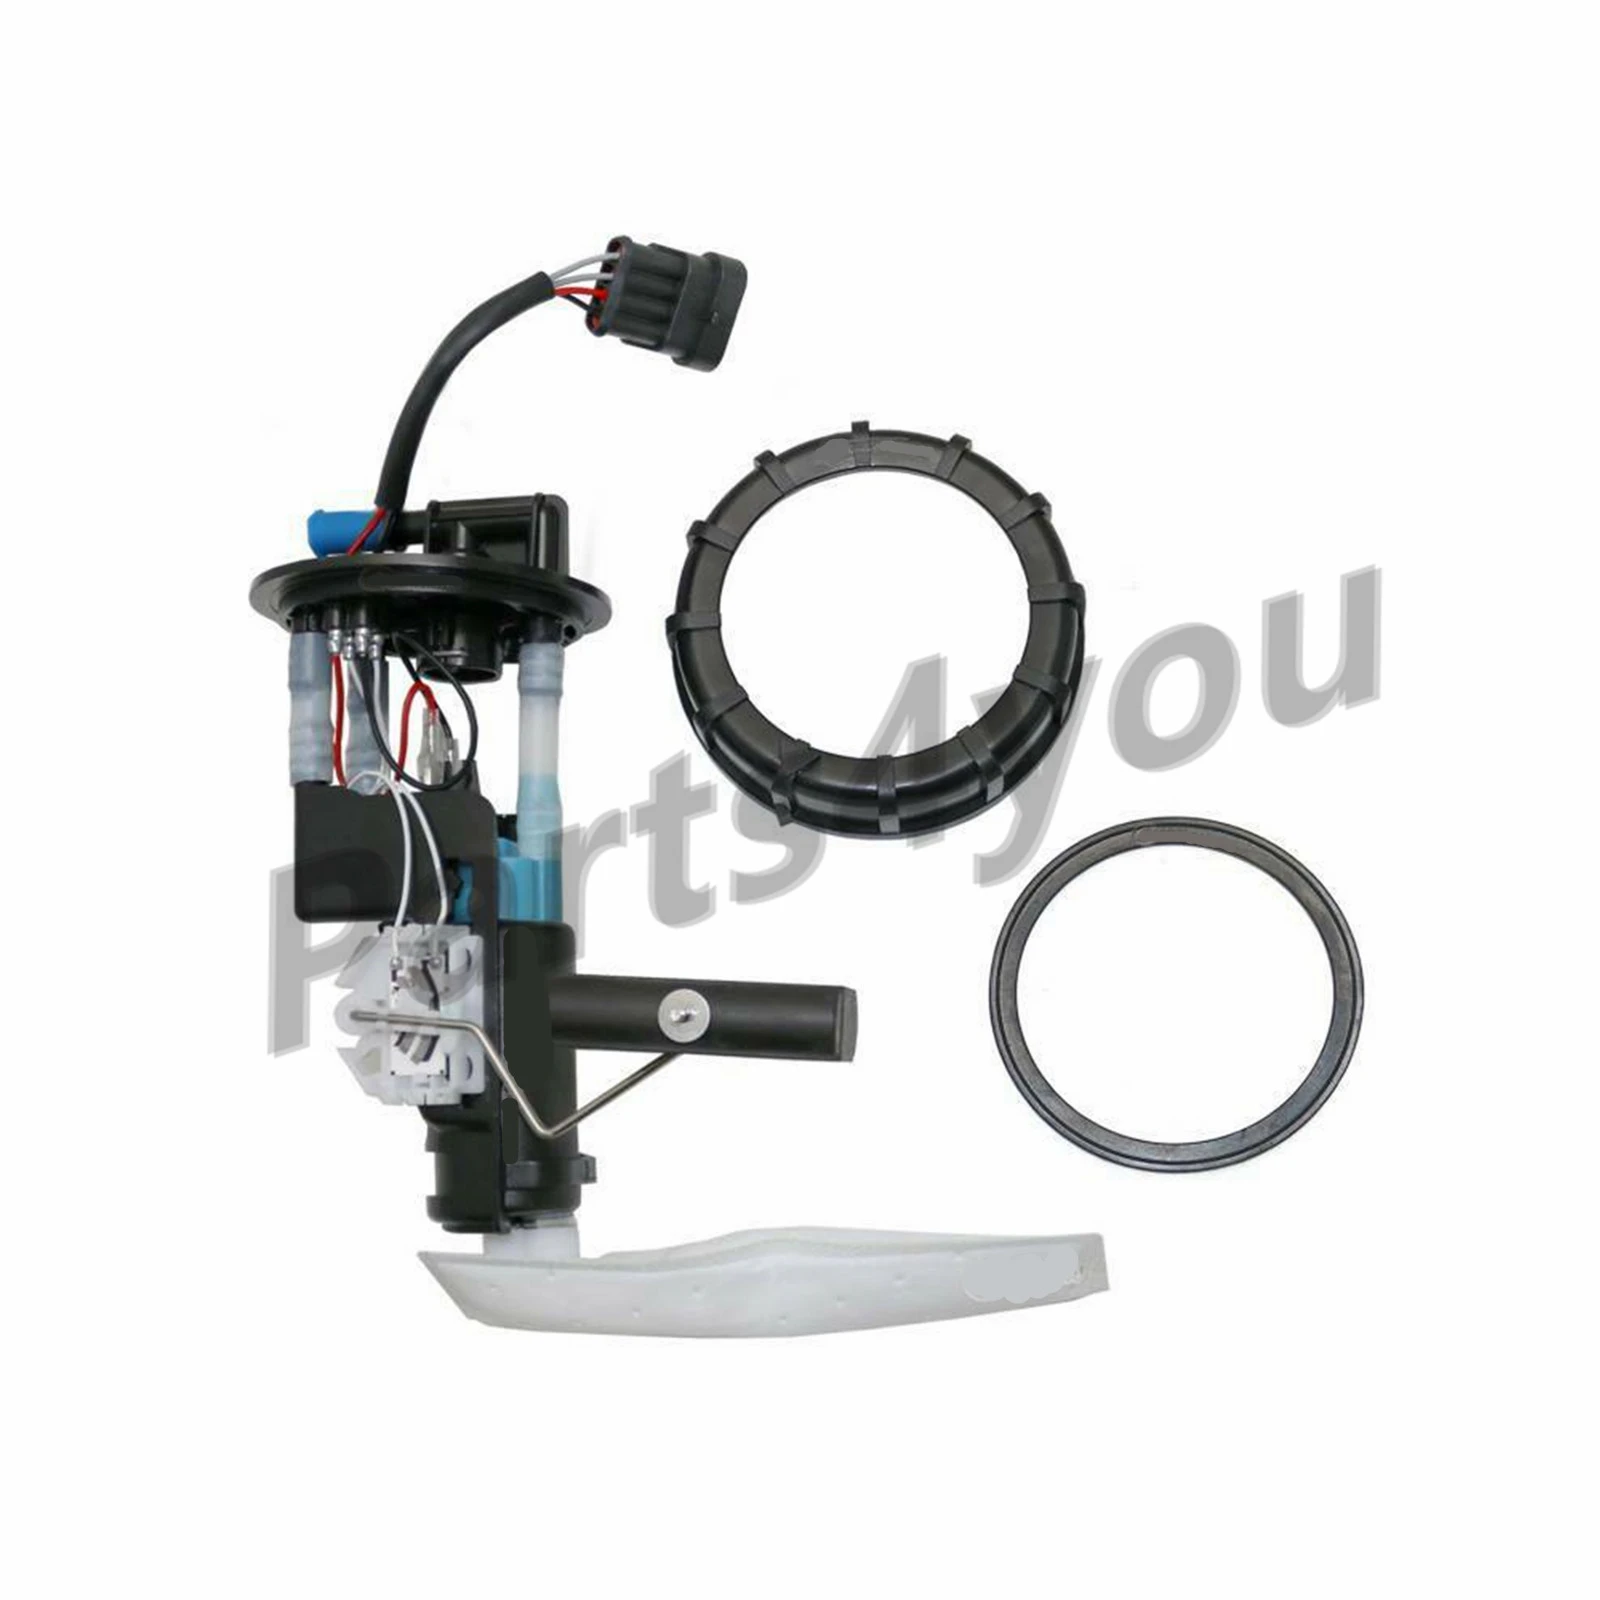 Fuel Pump for Polaris RZR 1000 60 INCH PS EFI 2206278 2208121 General 1000 EPS 47-1016 GENERAL 1000 EPS DELUXE RZR 1000 S